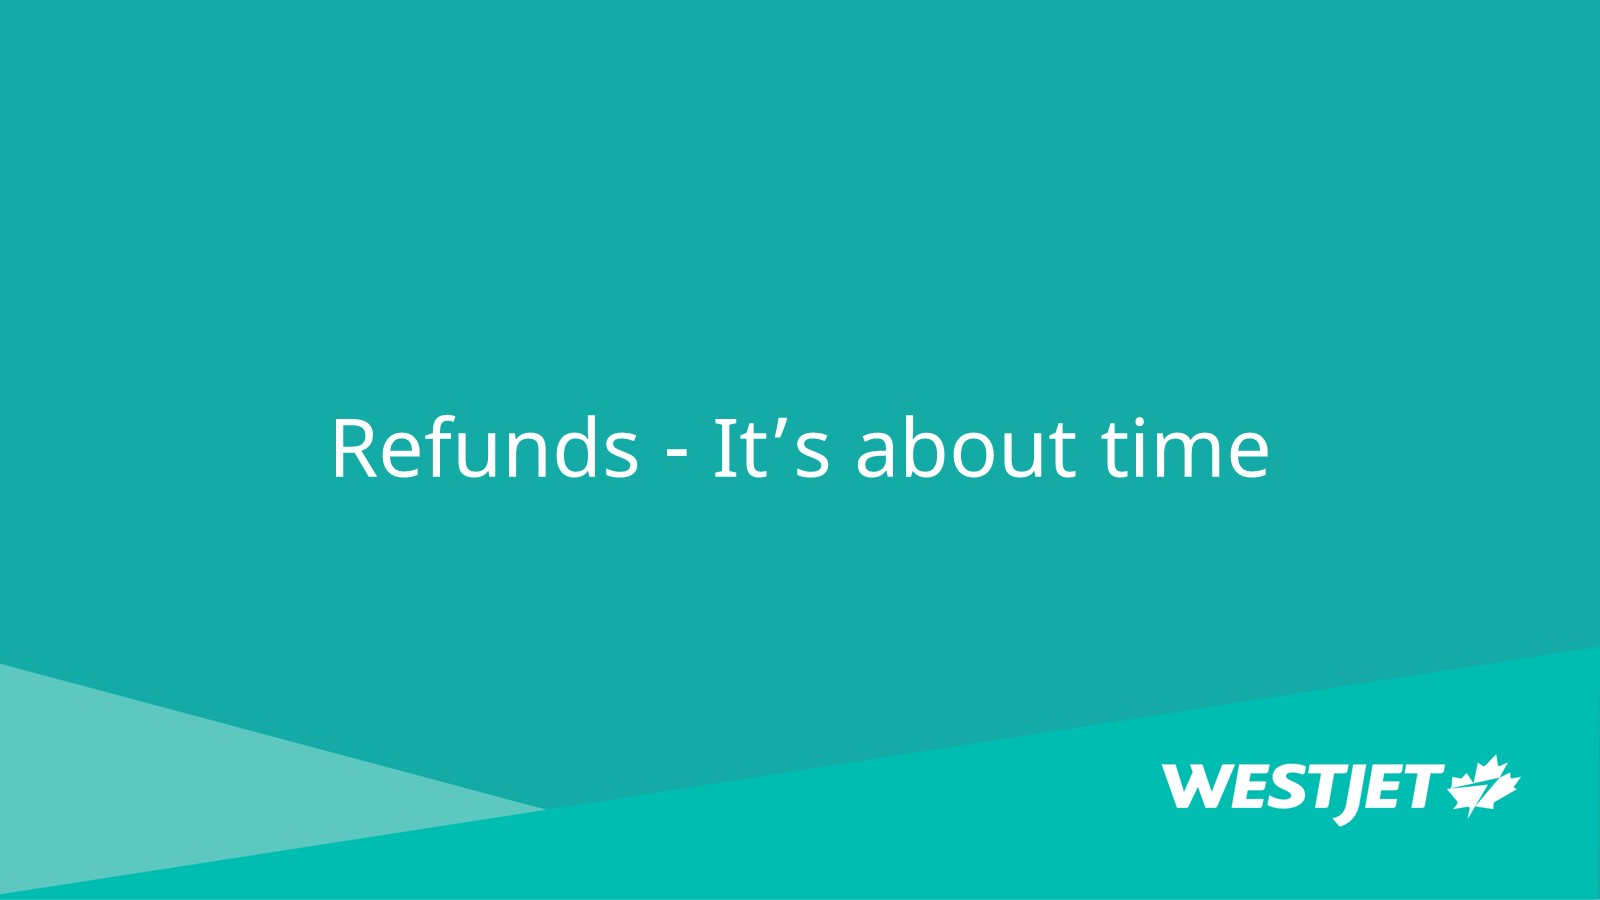 Refunds - It's about time